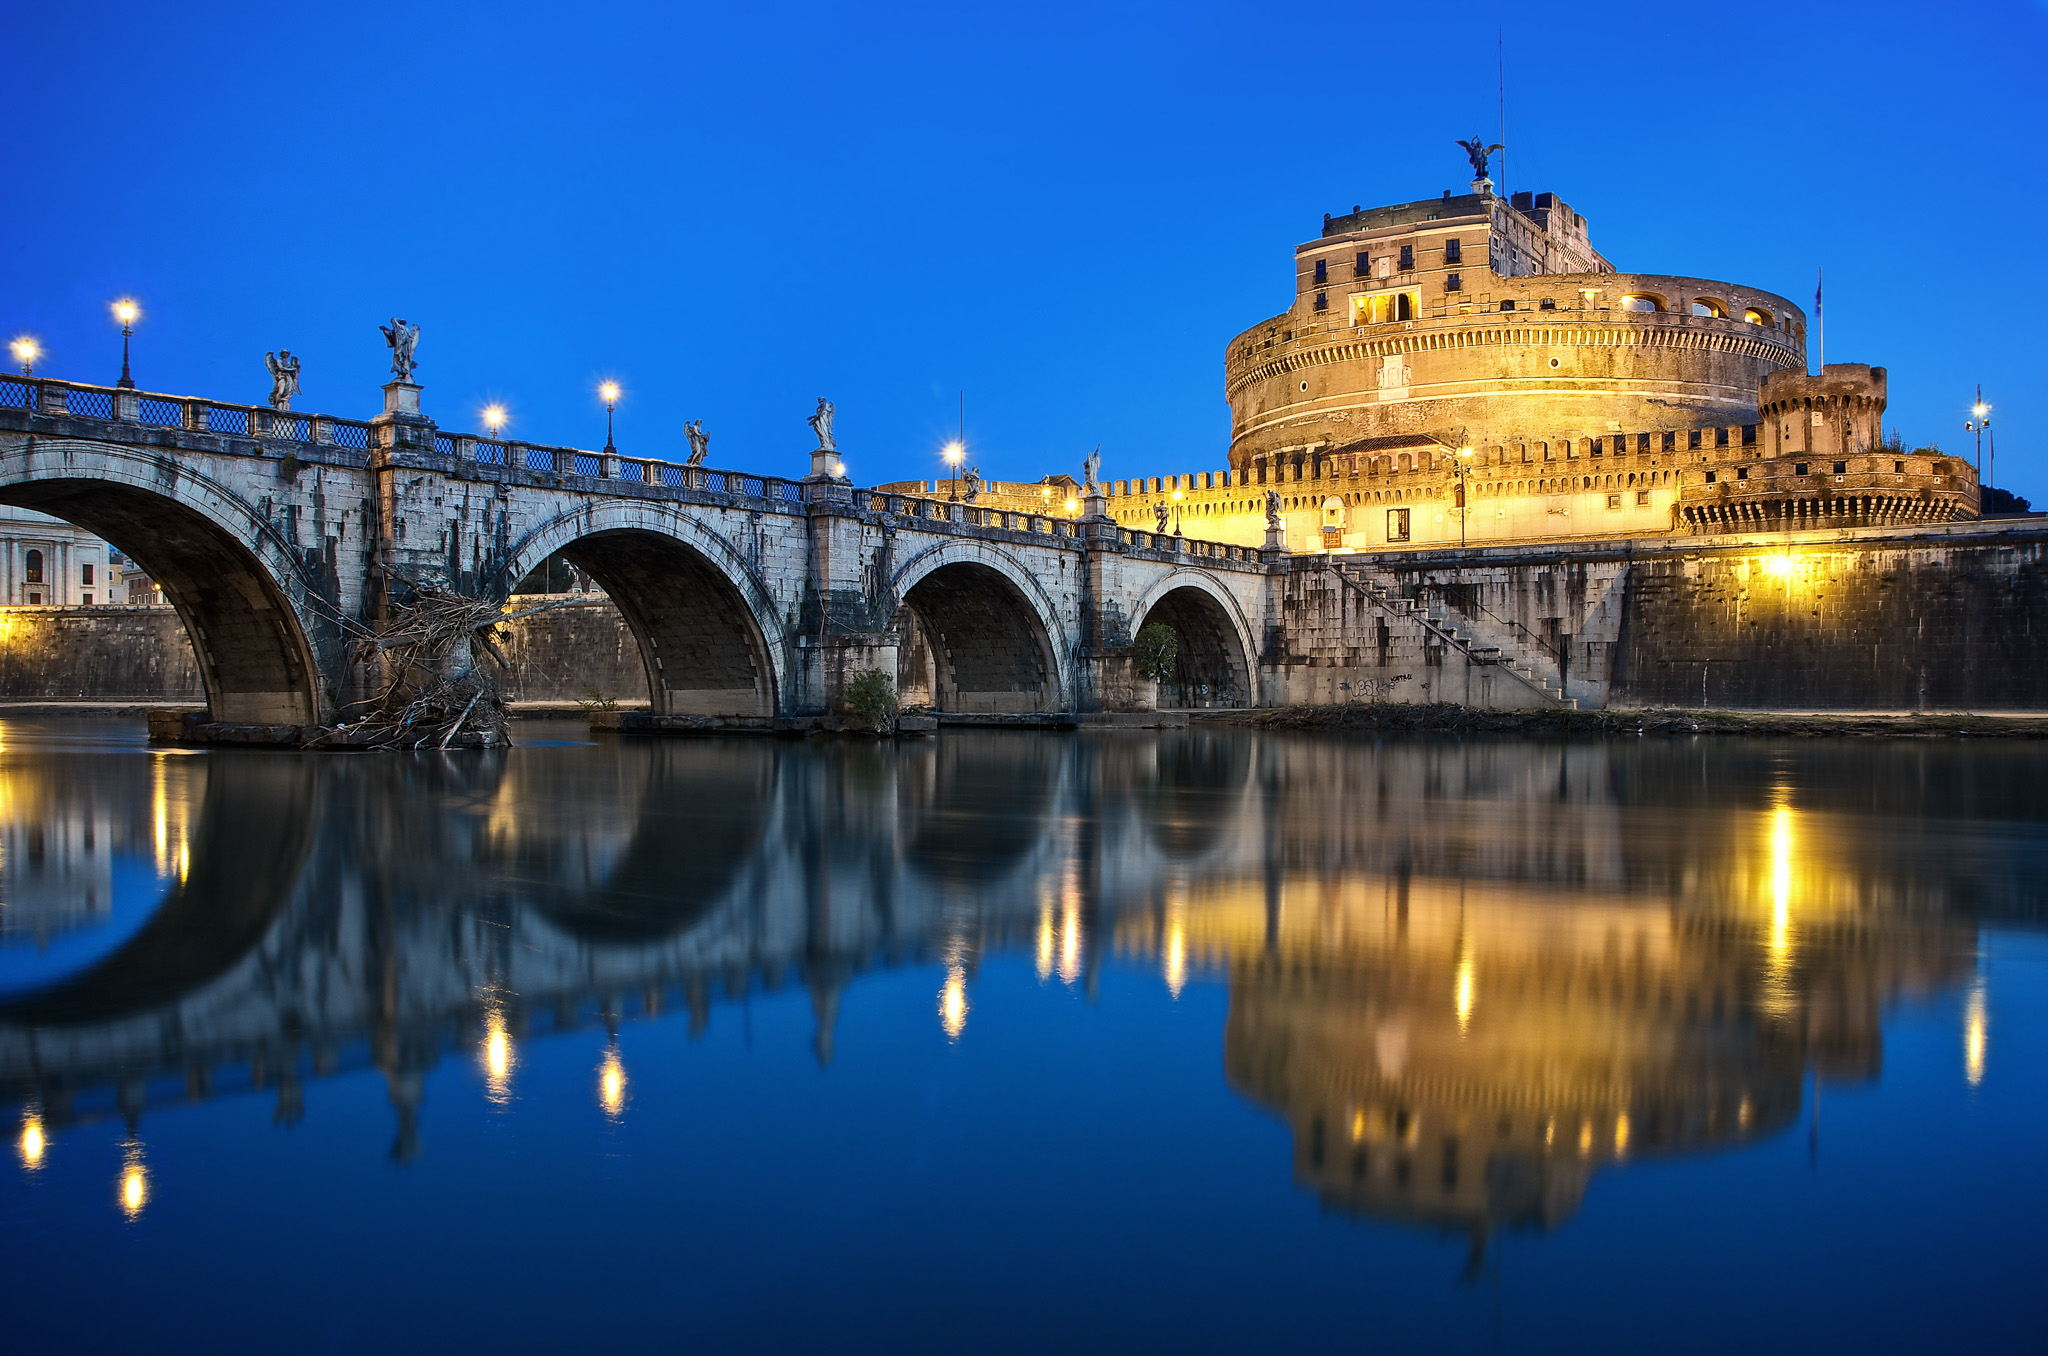 The Castel Sant'Angelo At Dawn